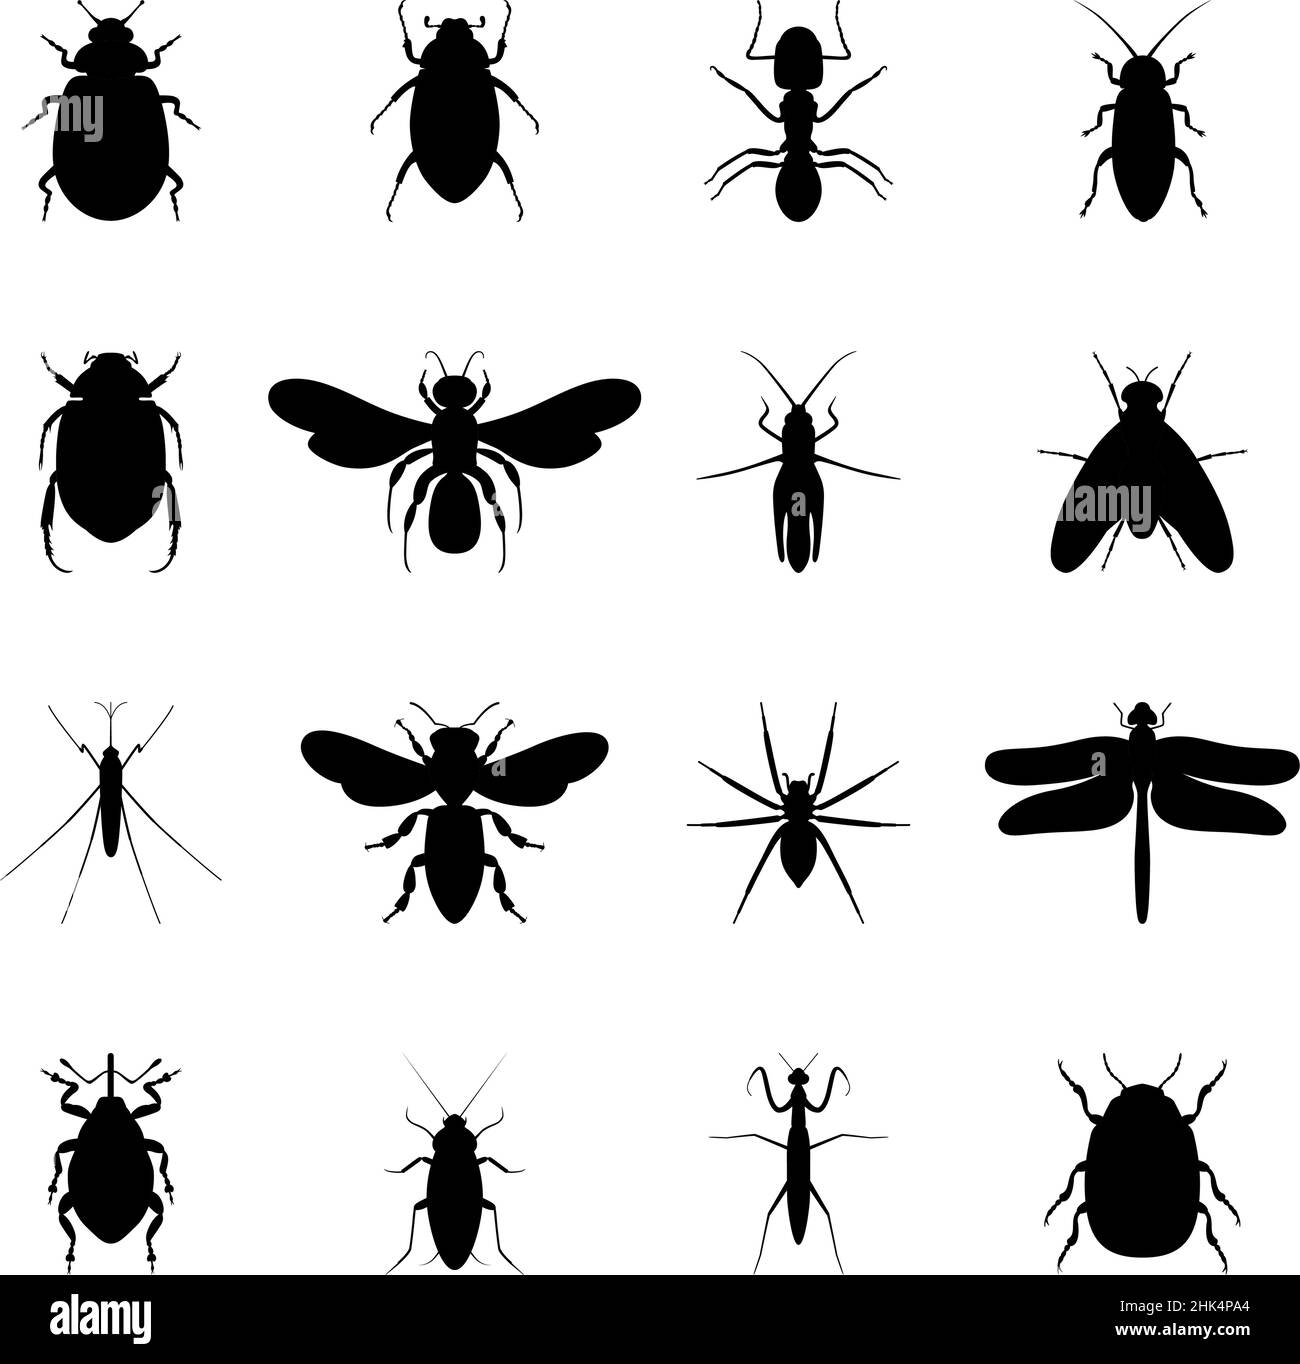 Set of black silhouettes of insects, vector illustration Stock Vector